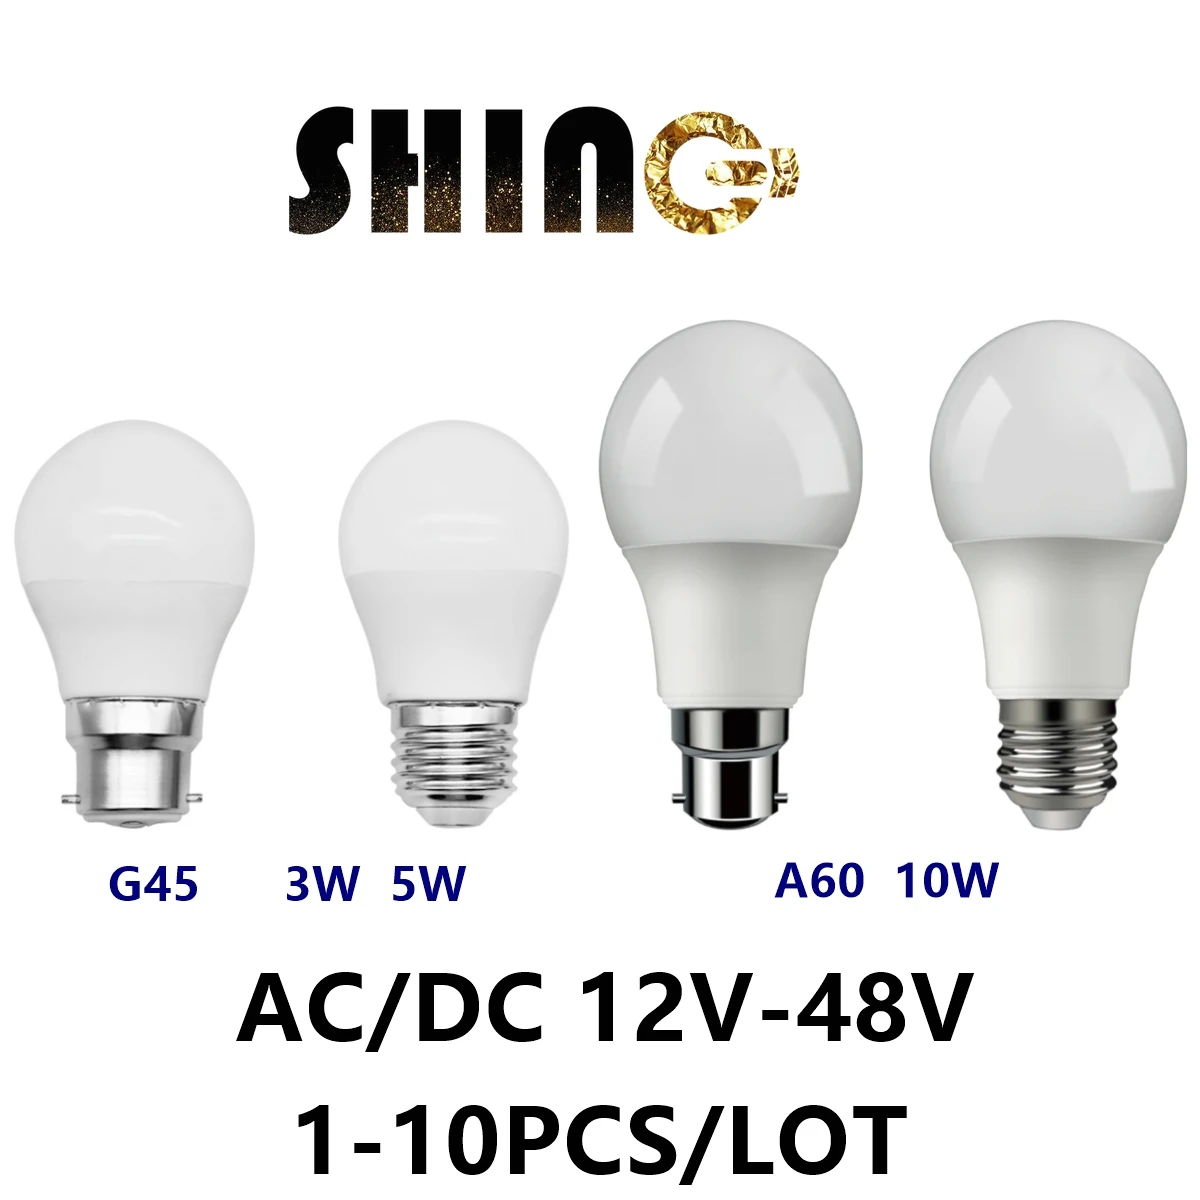 1-10pcs LED Low voltage AC/DC12V 24V 36V 48V bulb 3W 5W 10W super bright without strobe E27 B22 suitable for solar battery bulbs